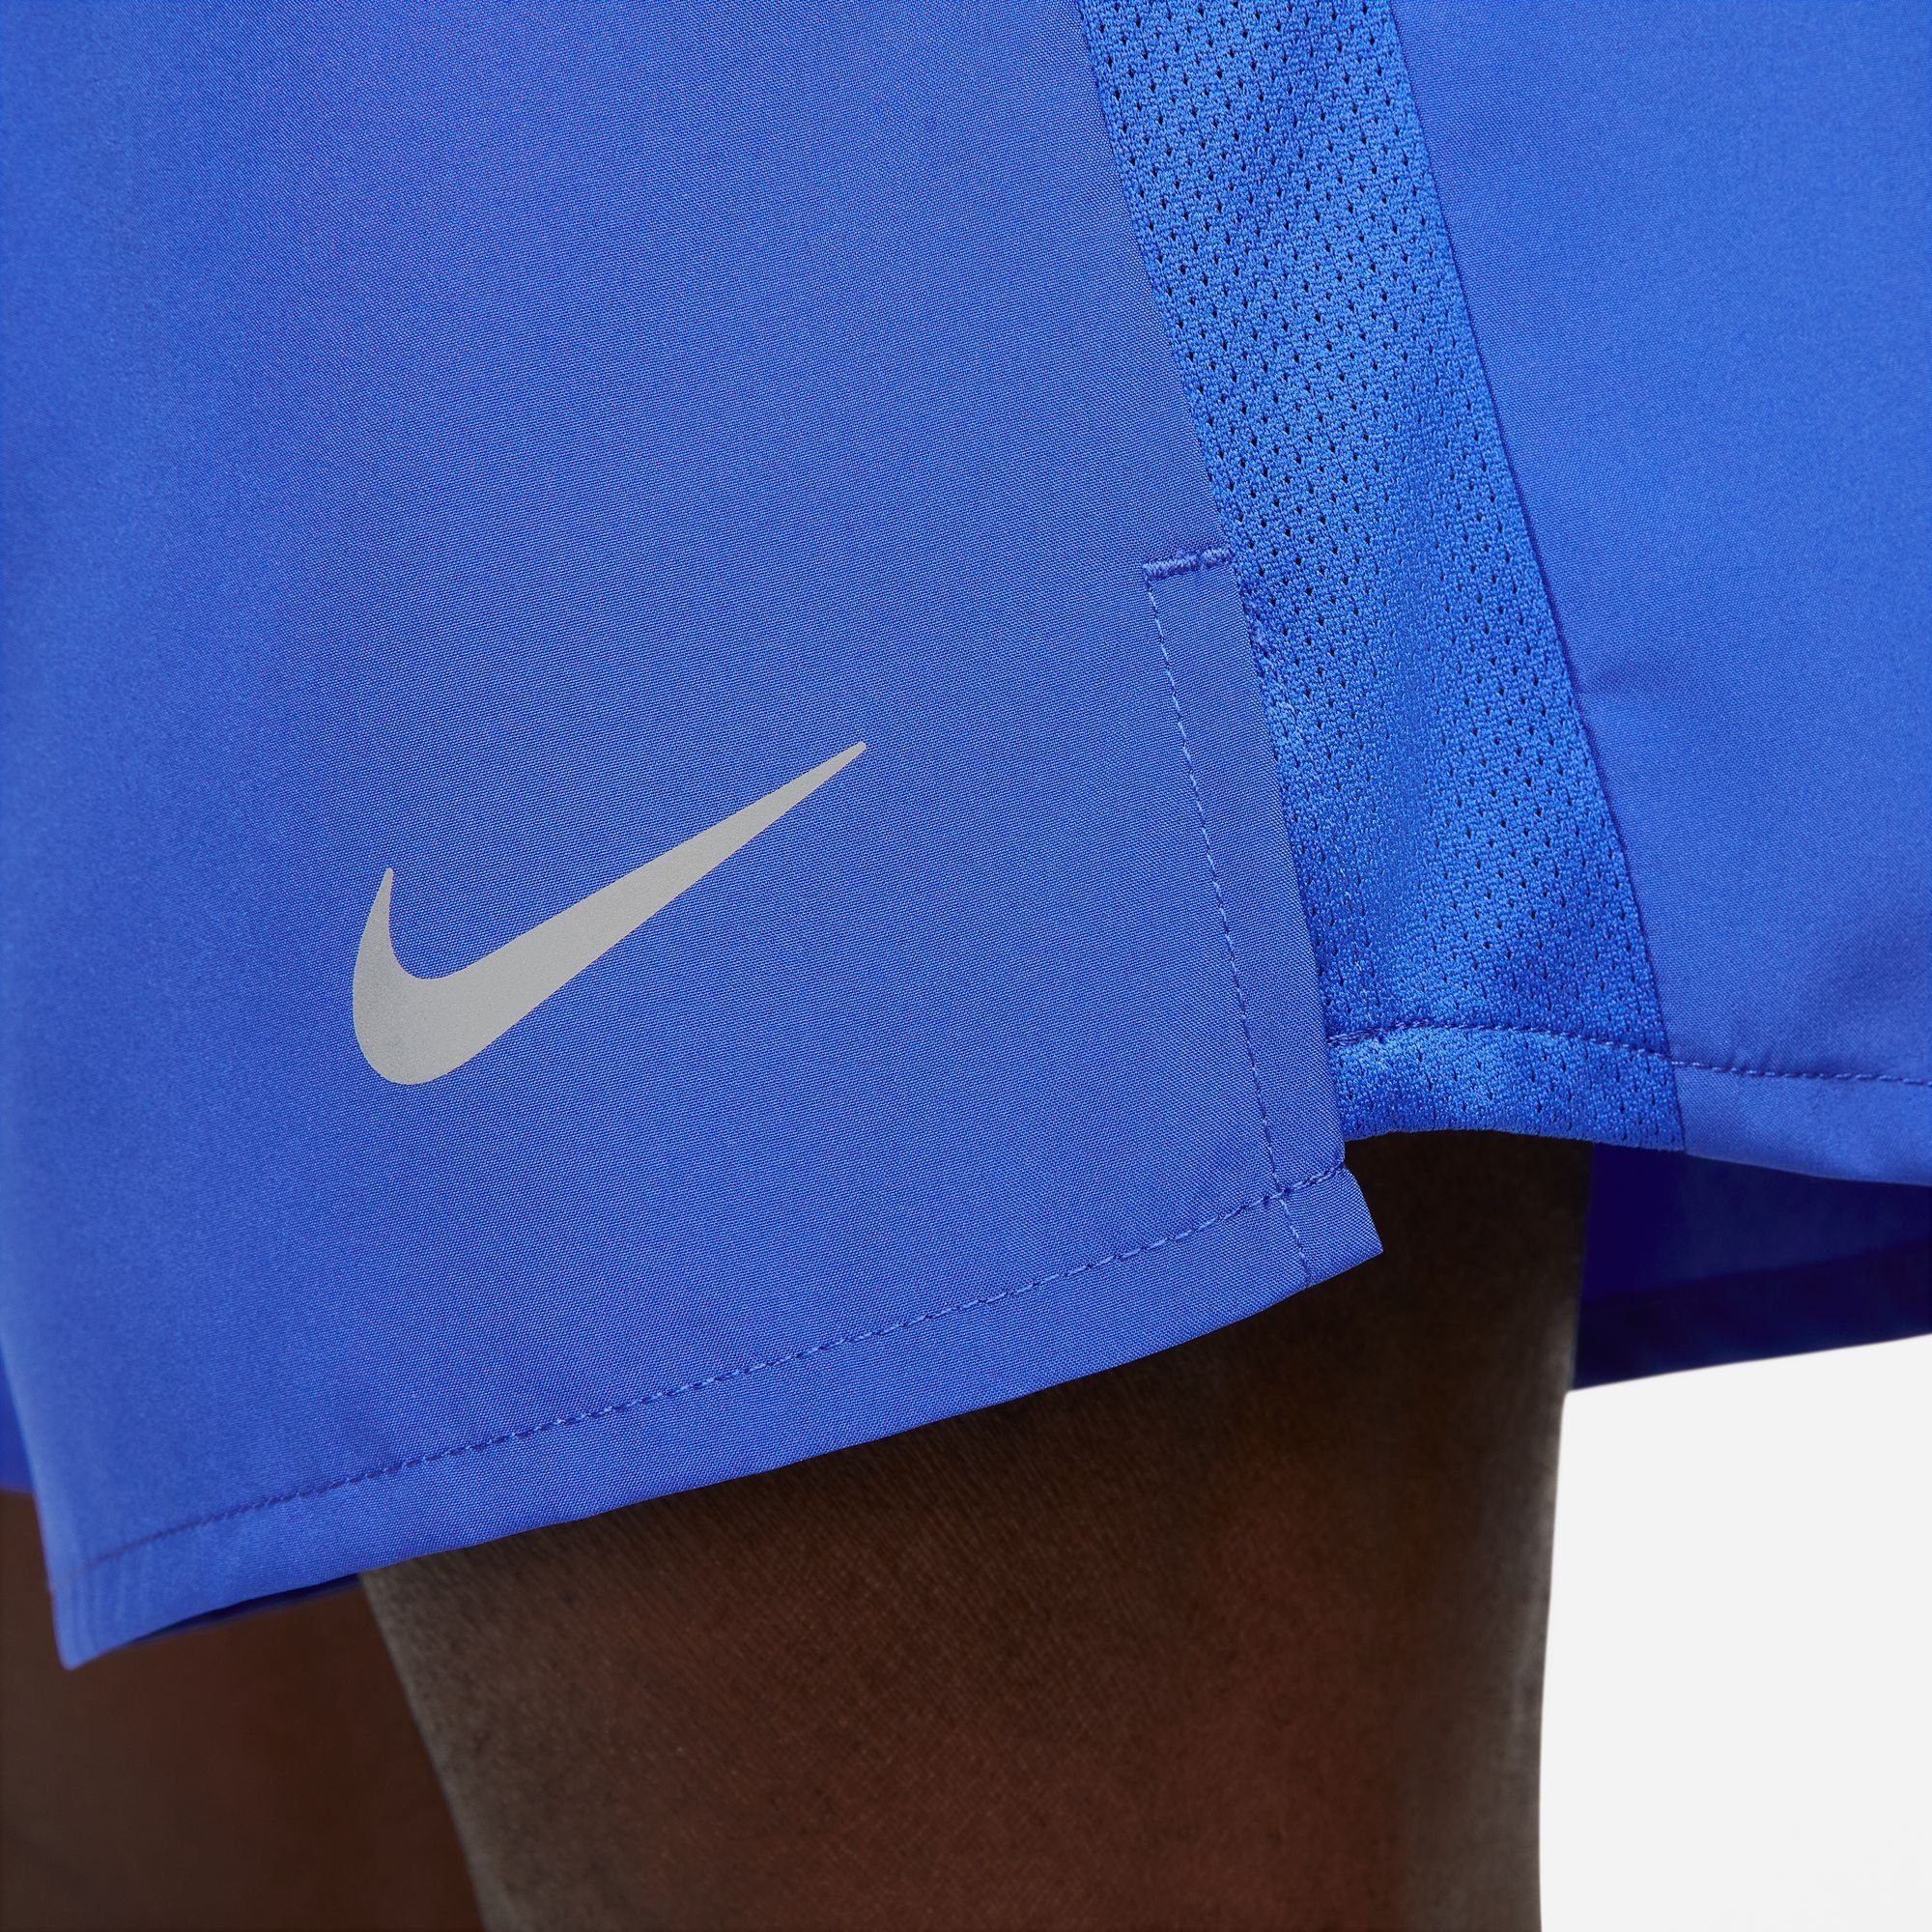 RUNNING SILV Nike MEN'S GAME ROYAL/GAME SHORTS ROYAL/REFLECTIVE Laufshorts DRI-FIT UNLINED CHALLENGER